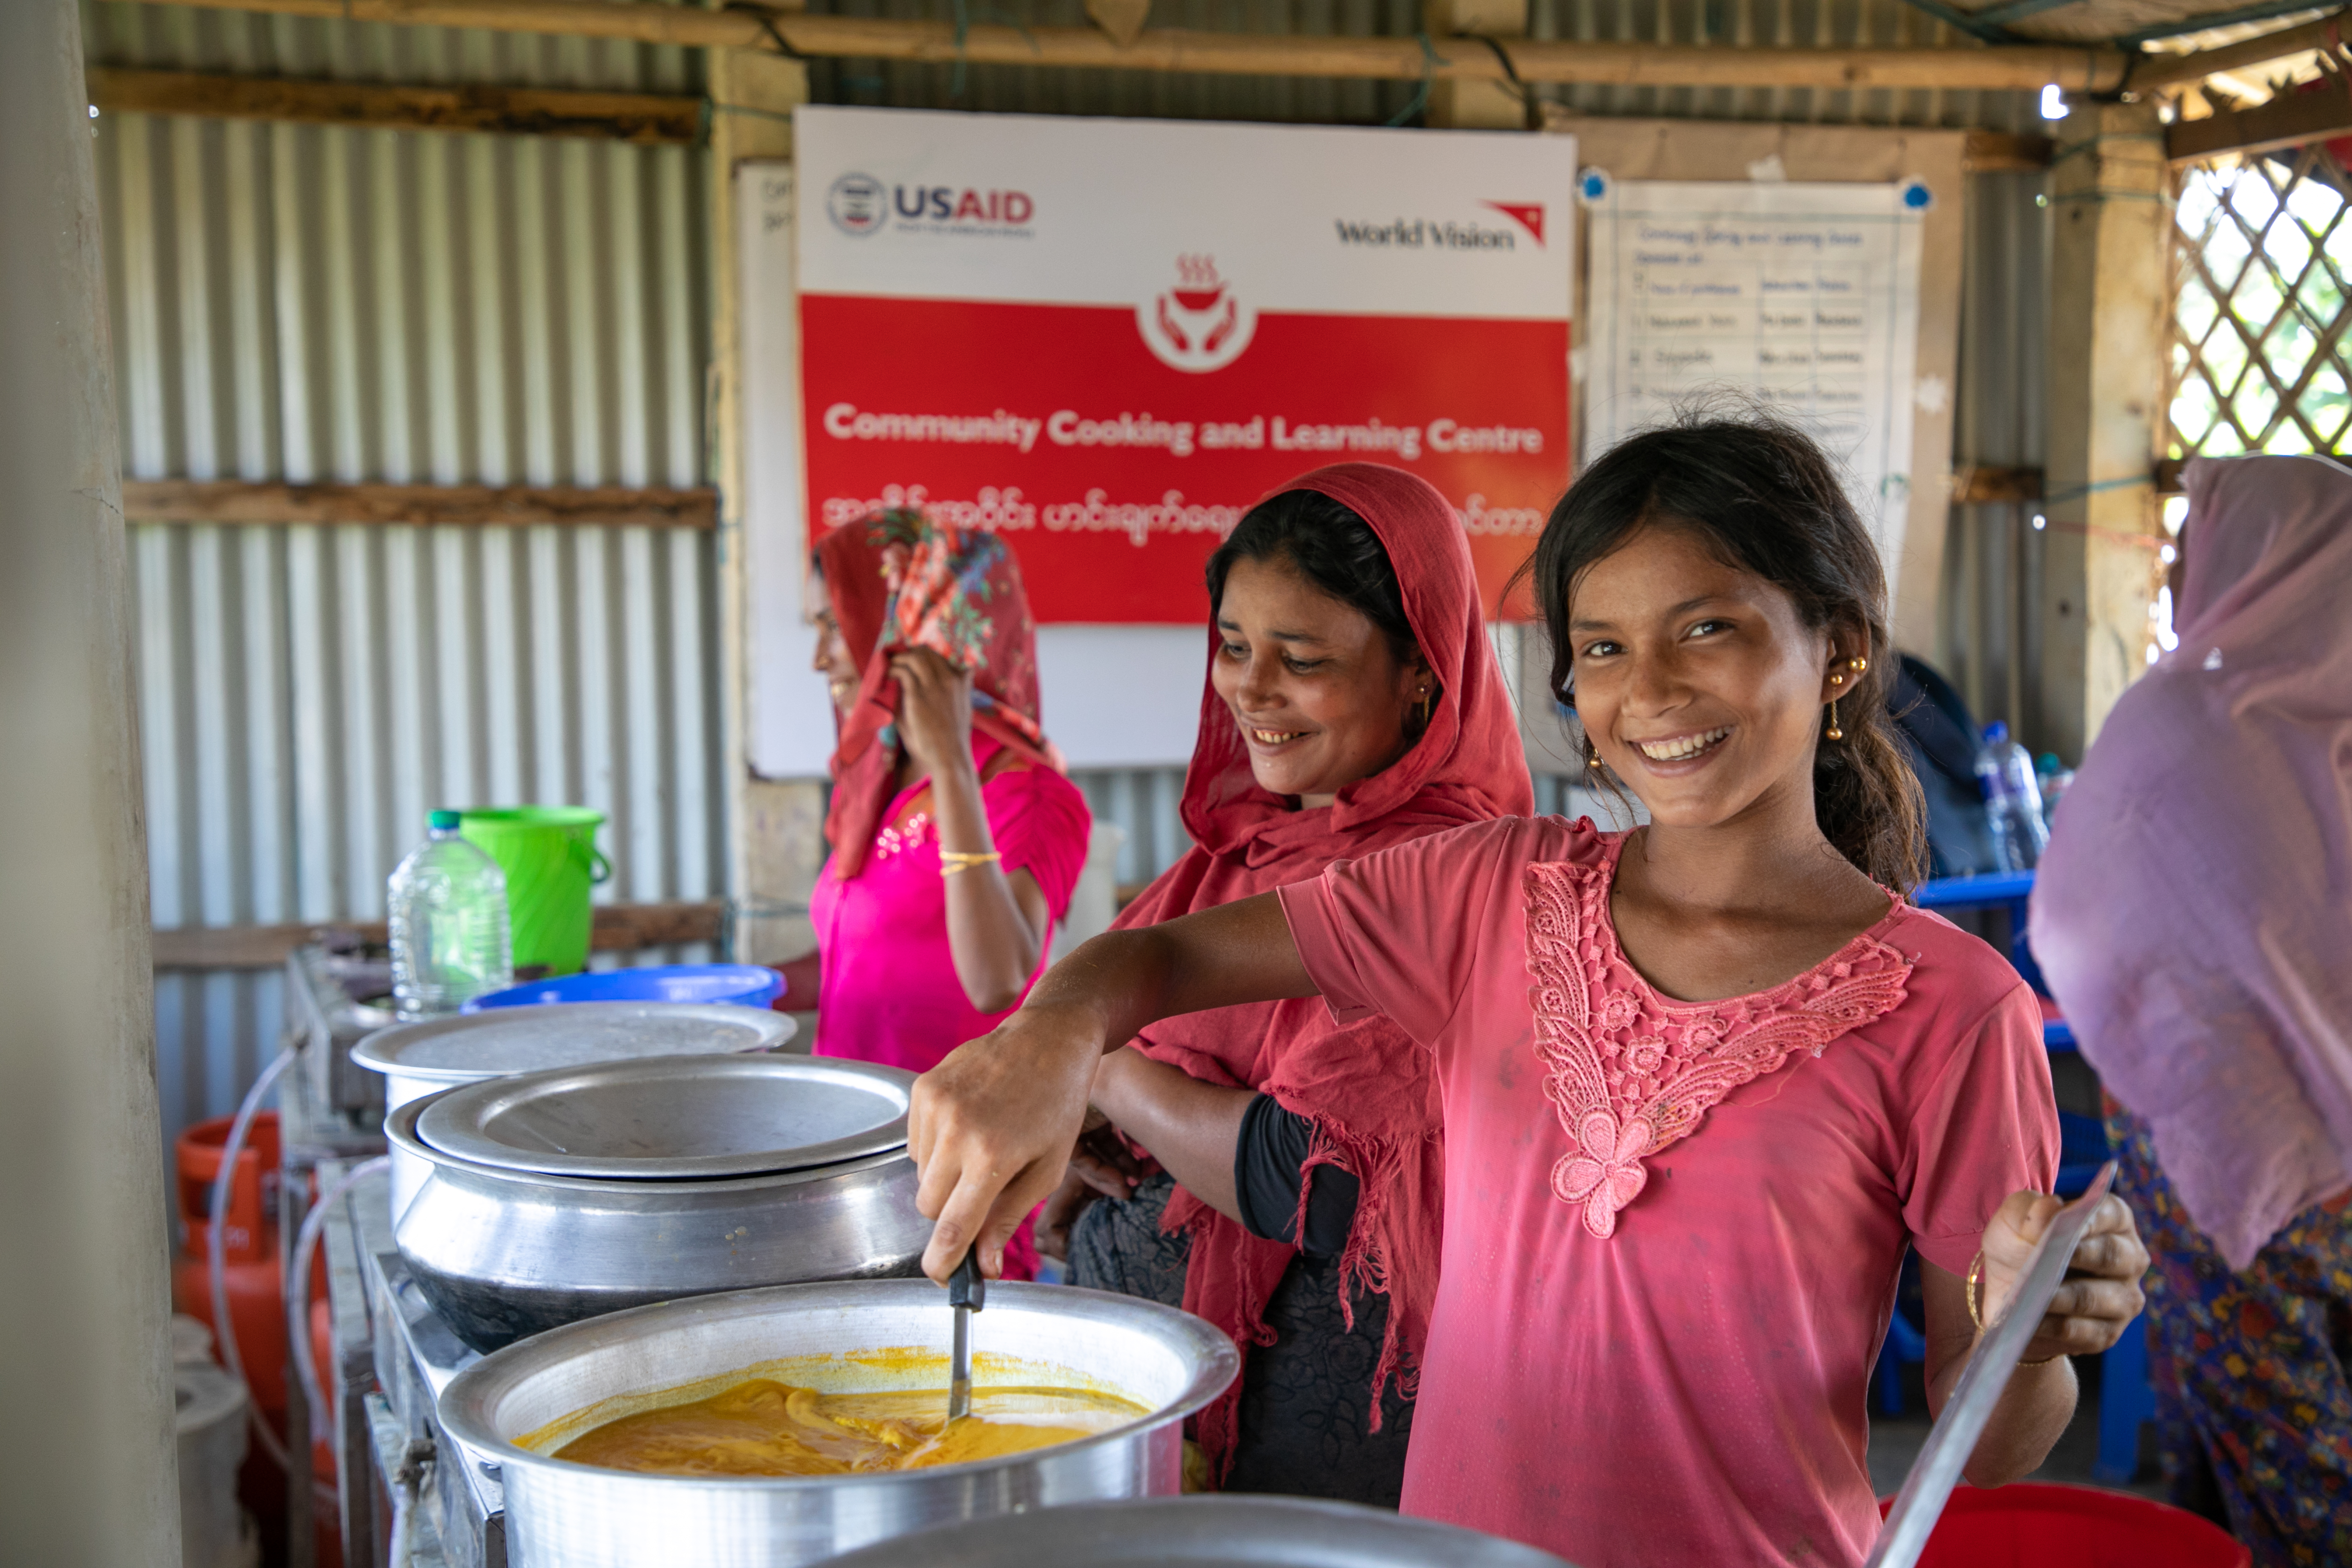 Raju, 12, prepares a meal in this community kitchen in the refugee camp